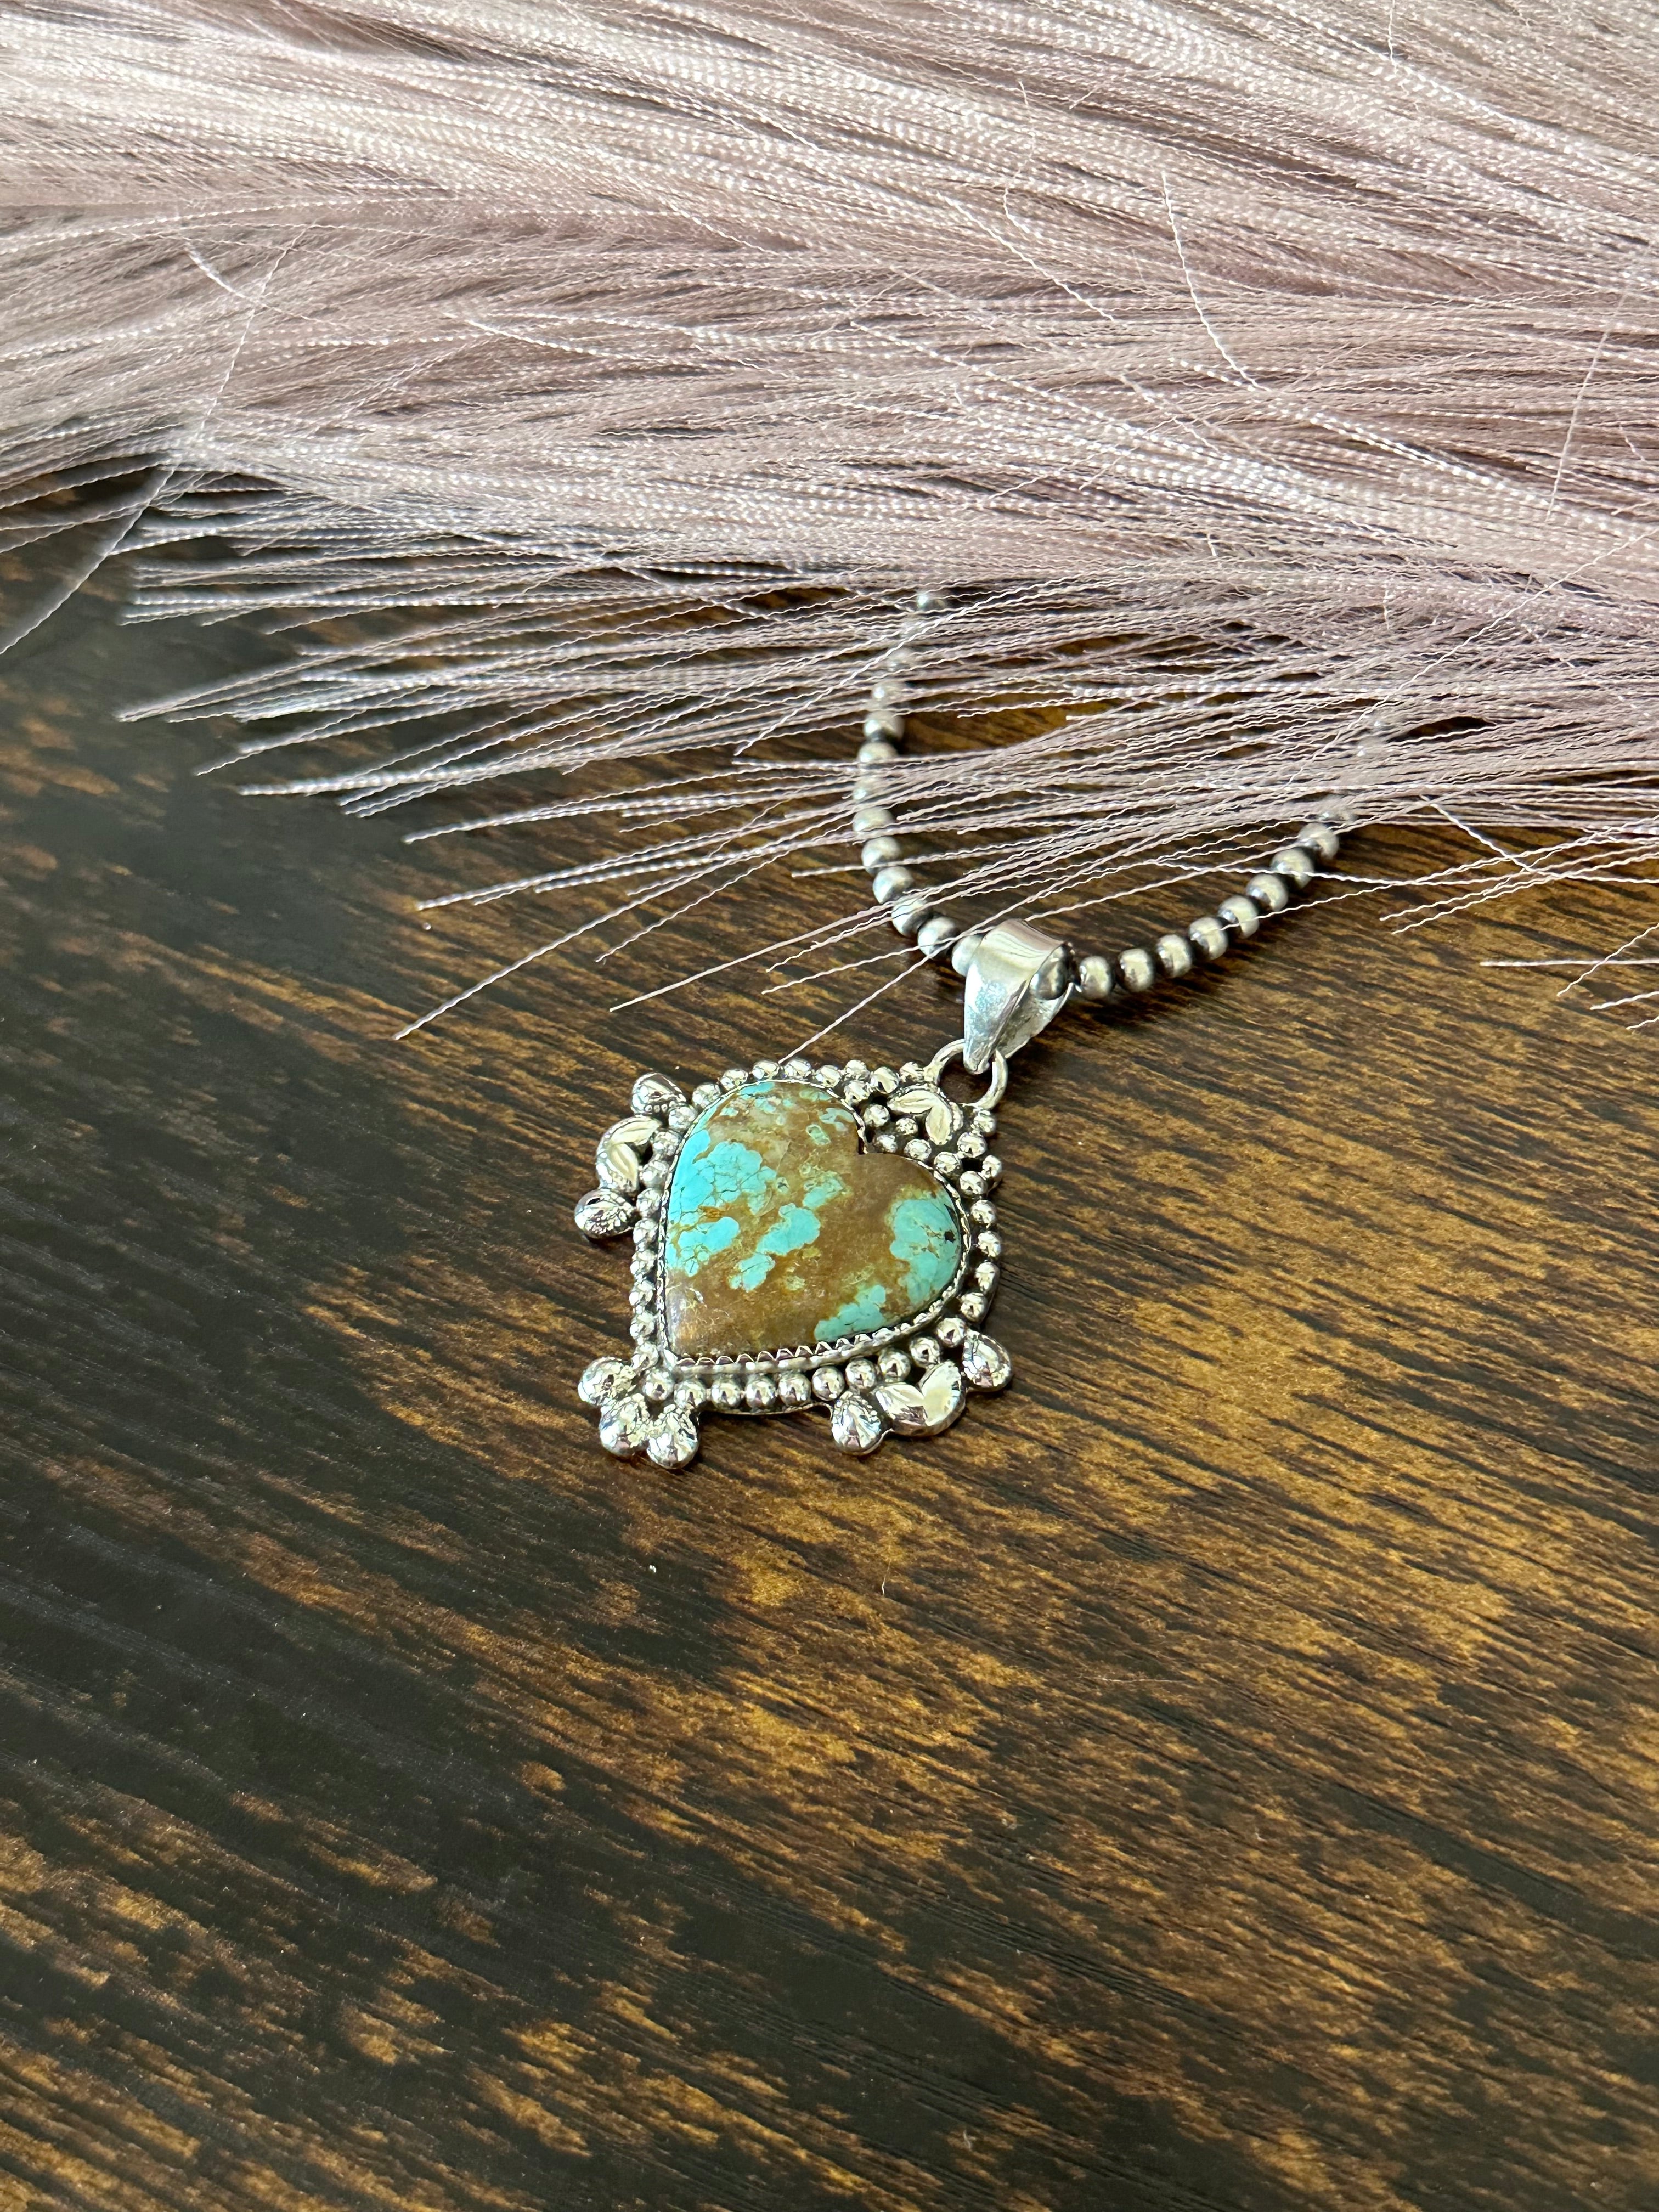 Southwest Handmade Number 8 Turquoise & Sterling Silver Heart Pendant